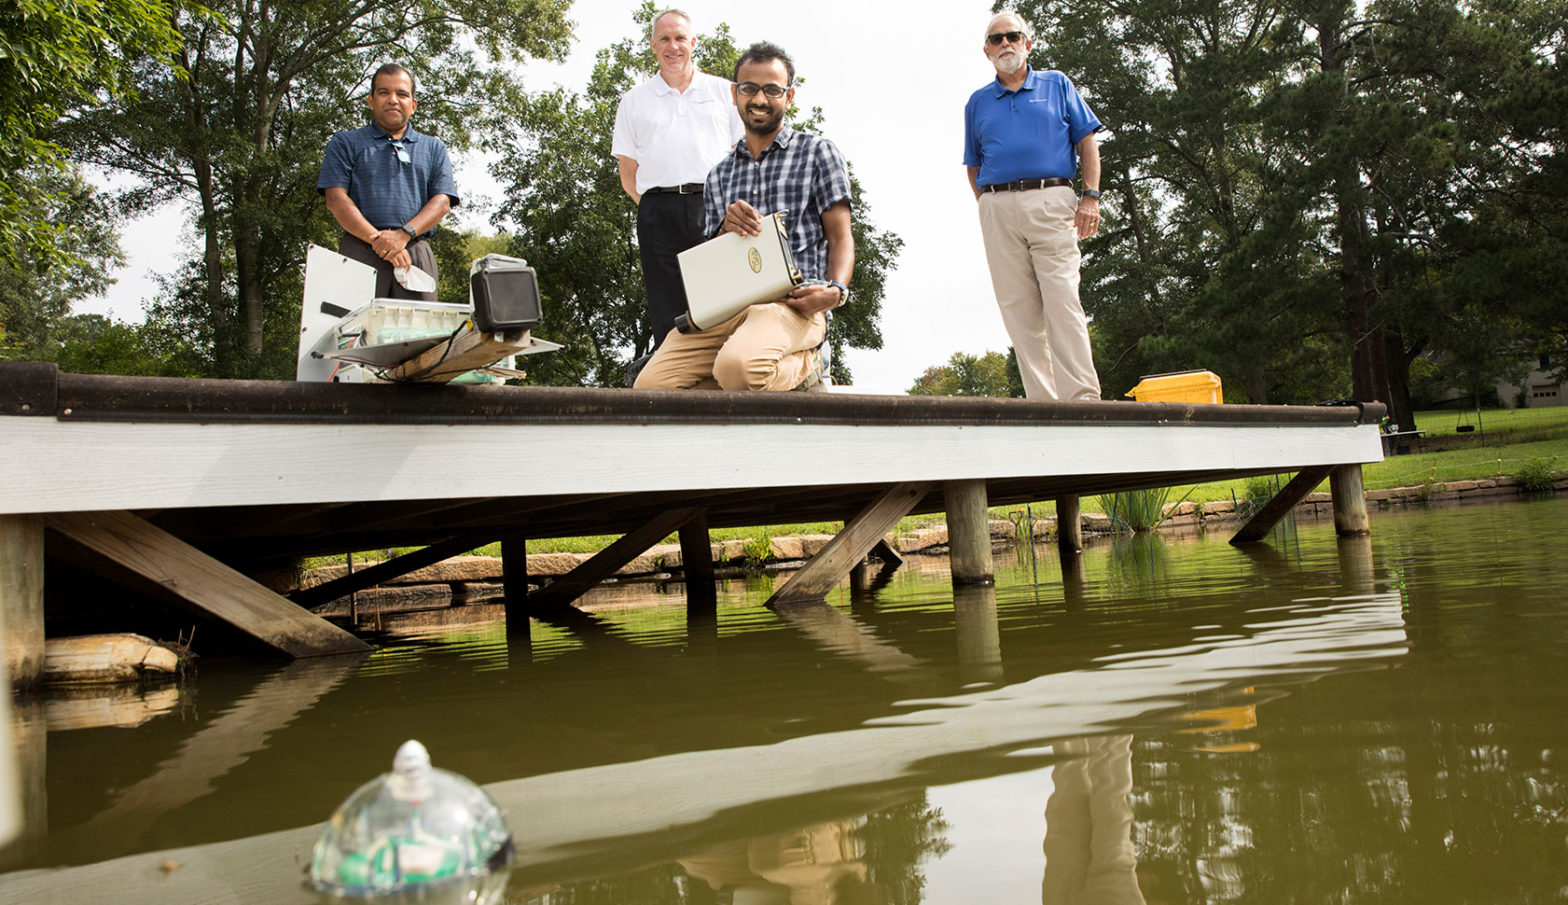 Professor Deepak Mishra, SpaceWorks CEO John Olds, PhD student Abishek Kumar, and SpaceWorks Program Manager Charles Hall pose for a team photo on the dock.